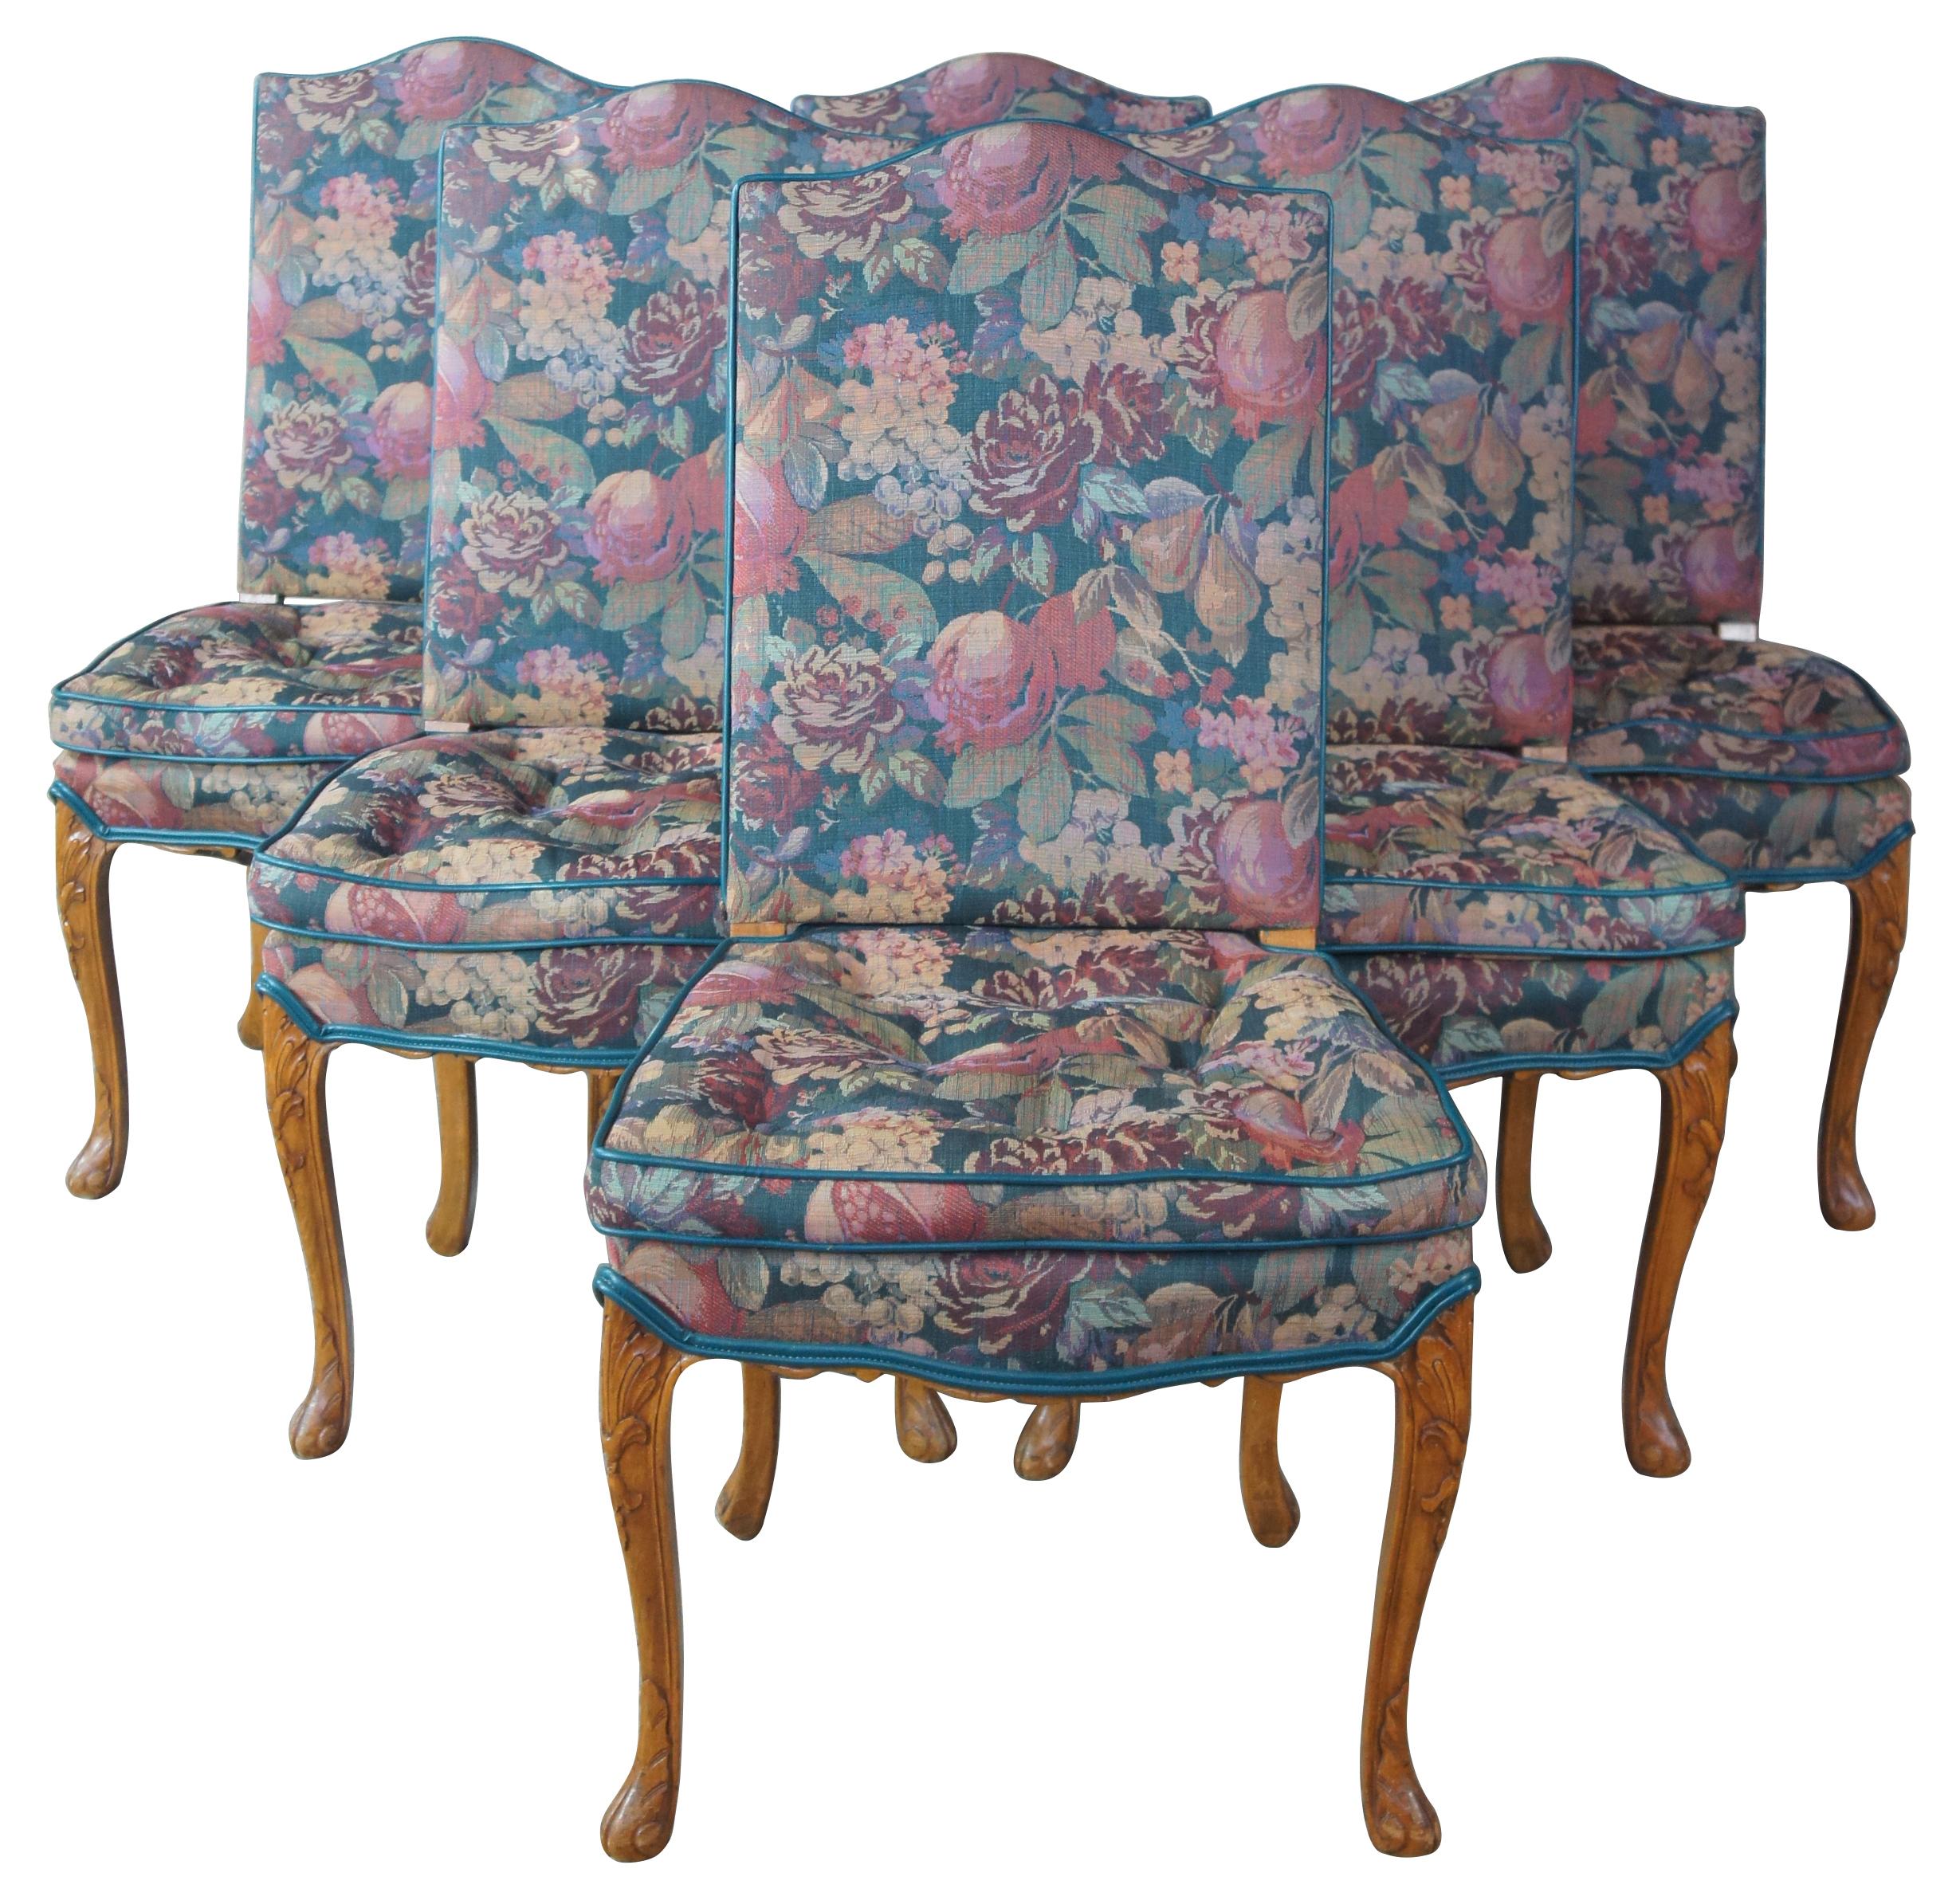 8 antique French Provincial carved walnut floral upholstered dining chairs

Early 20th century French dining chairs. Made from walnut with intricately carved acanthus and scalloped accents. Fully upholstered with a floral fabric and built in